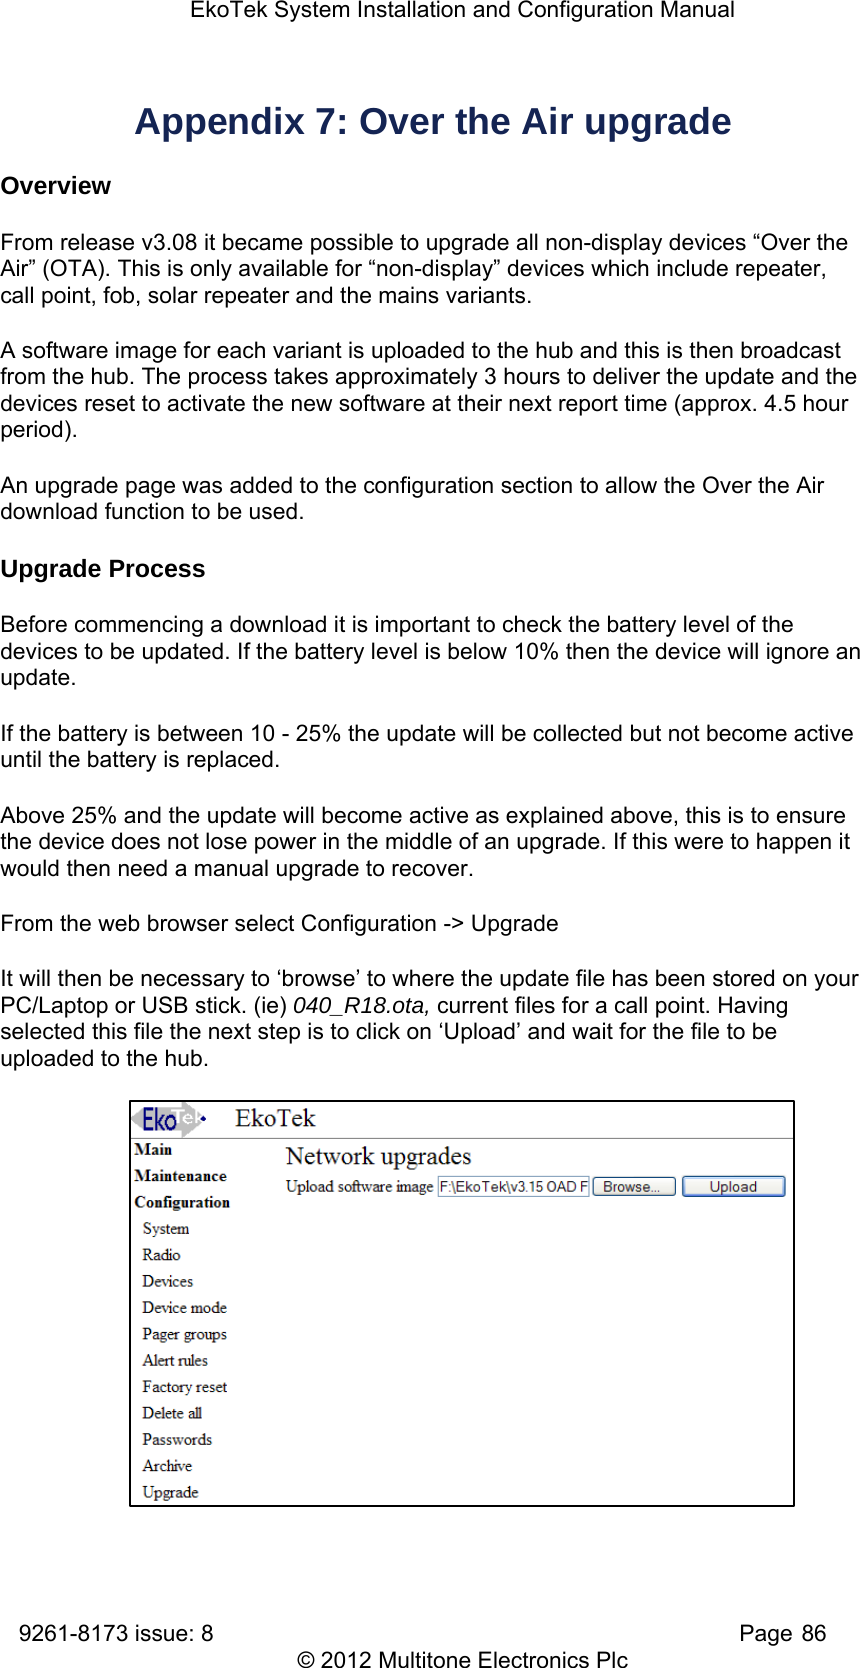 EkoTek System Installation and Configuration Manual 9261-8173 issue: 8   Page 86 © 2012 Multitone Electronics Plc Appendix 7: Over the Air upgrade Overview From release v3.08 it became possible to upgrade all non-display devices “Over the Air” (OTA). This is only available for “non-display” devices which include repeater, call point, fob, solar repeater and the mains variants. A software image for each variant is uploaded to the hub and this is then broadcast from the hub. The process takes approximately 3 hours to deliver the update and the devices reset to activate the new software at their next report time (approx. 4.5 hour period). An upgrade page was added to the configuration section to allow the Over the Air download function to be used. Upgrade Process Before commencing a download it is important to check the battery level of the devices to be updated. If the battery level is below 10% then the device will ignore an update. If the battery is between 10 - 25% the update will be collected but not become active until the battery is replaced. Above 25% and the update will become active as explained above, this is to ensure the device does not lose power in the middle of an upgrade. If this were to happen it would then need a manual upgrade to recover. From the web browser select Configuration -&gt; Upgrade It will then be necessary to ‘browse’ to where the update file has been stored on your PC/Laptop or USB stick. (ie) 040_R18.ota, current files for a call point. Having selected this file the next step is to click on ‘Upload’ and wait for the file to be uploaded to the hub.               